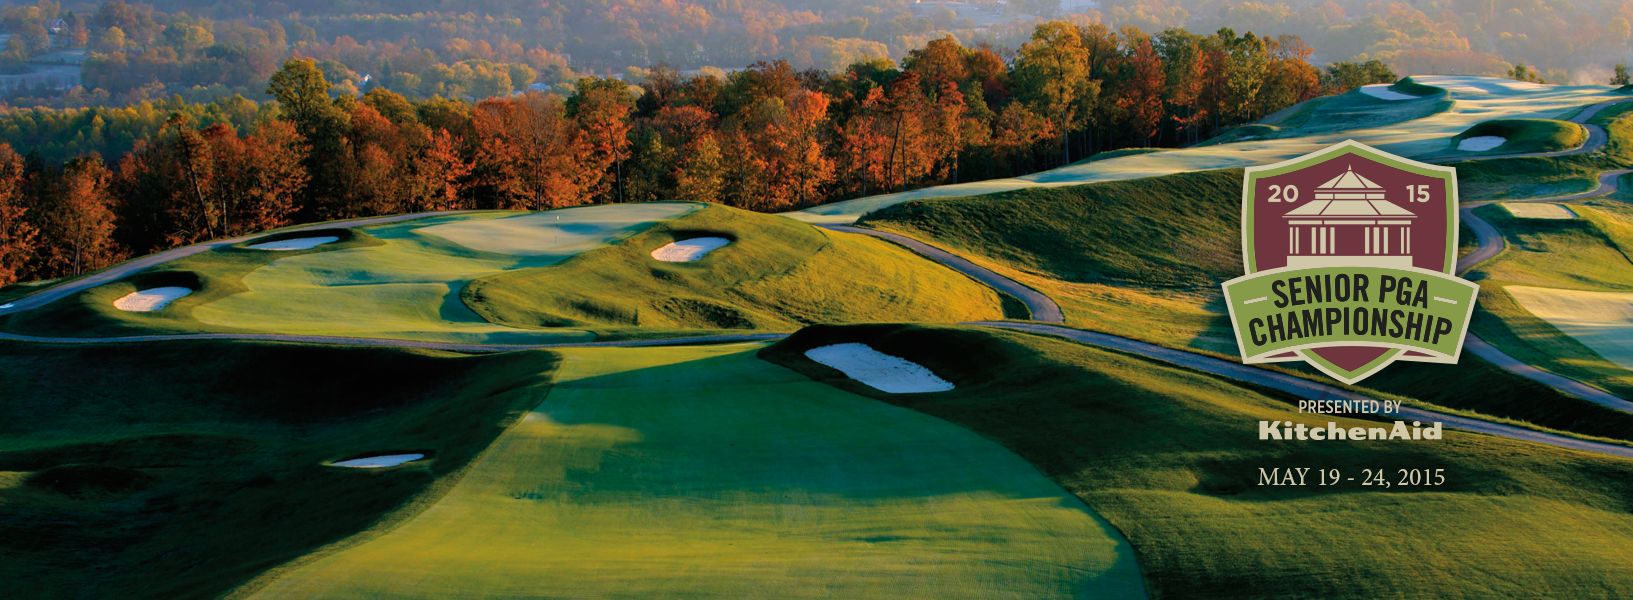 Funnel C. reccomend French lick indiana golf courses